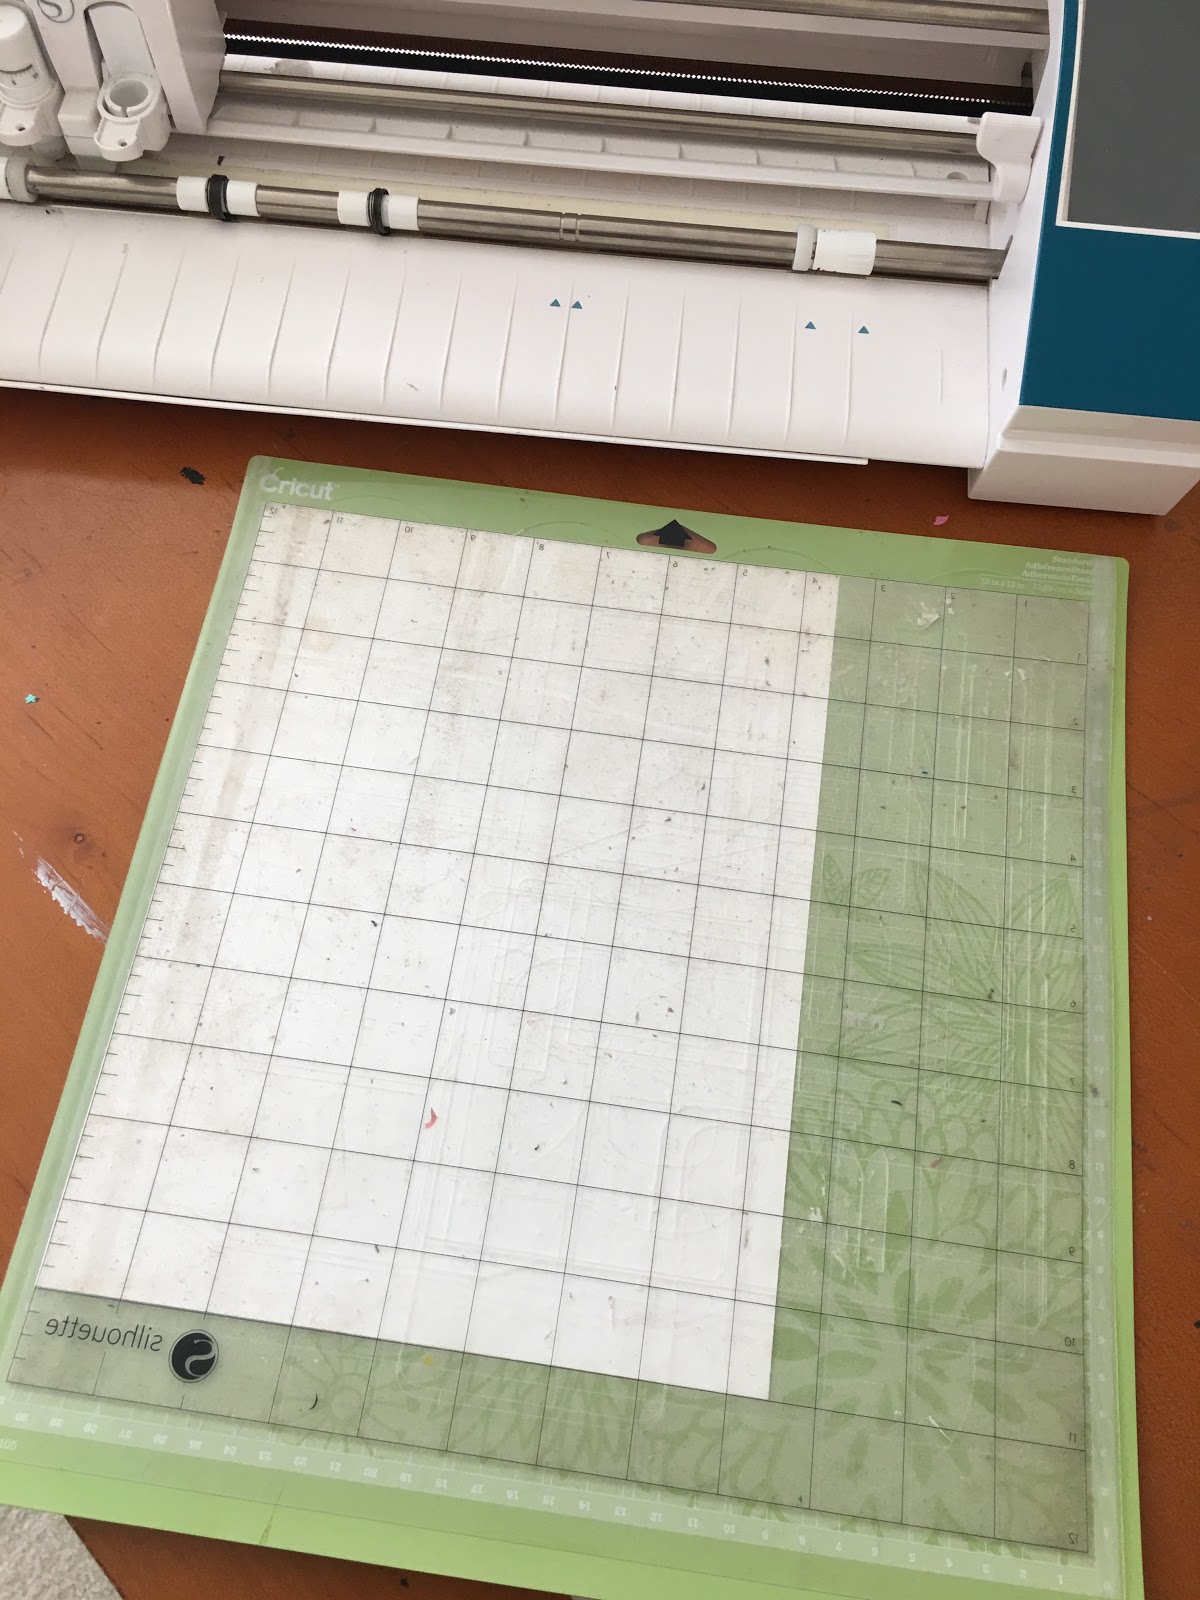 Beware: 'Silhouette' Cutting Mat Not Sticky? Here's Why! - Silhouette School